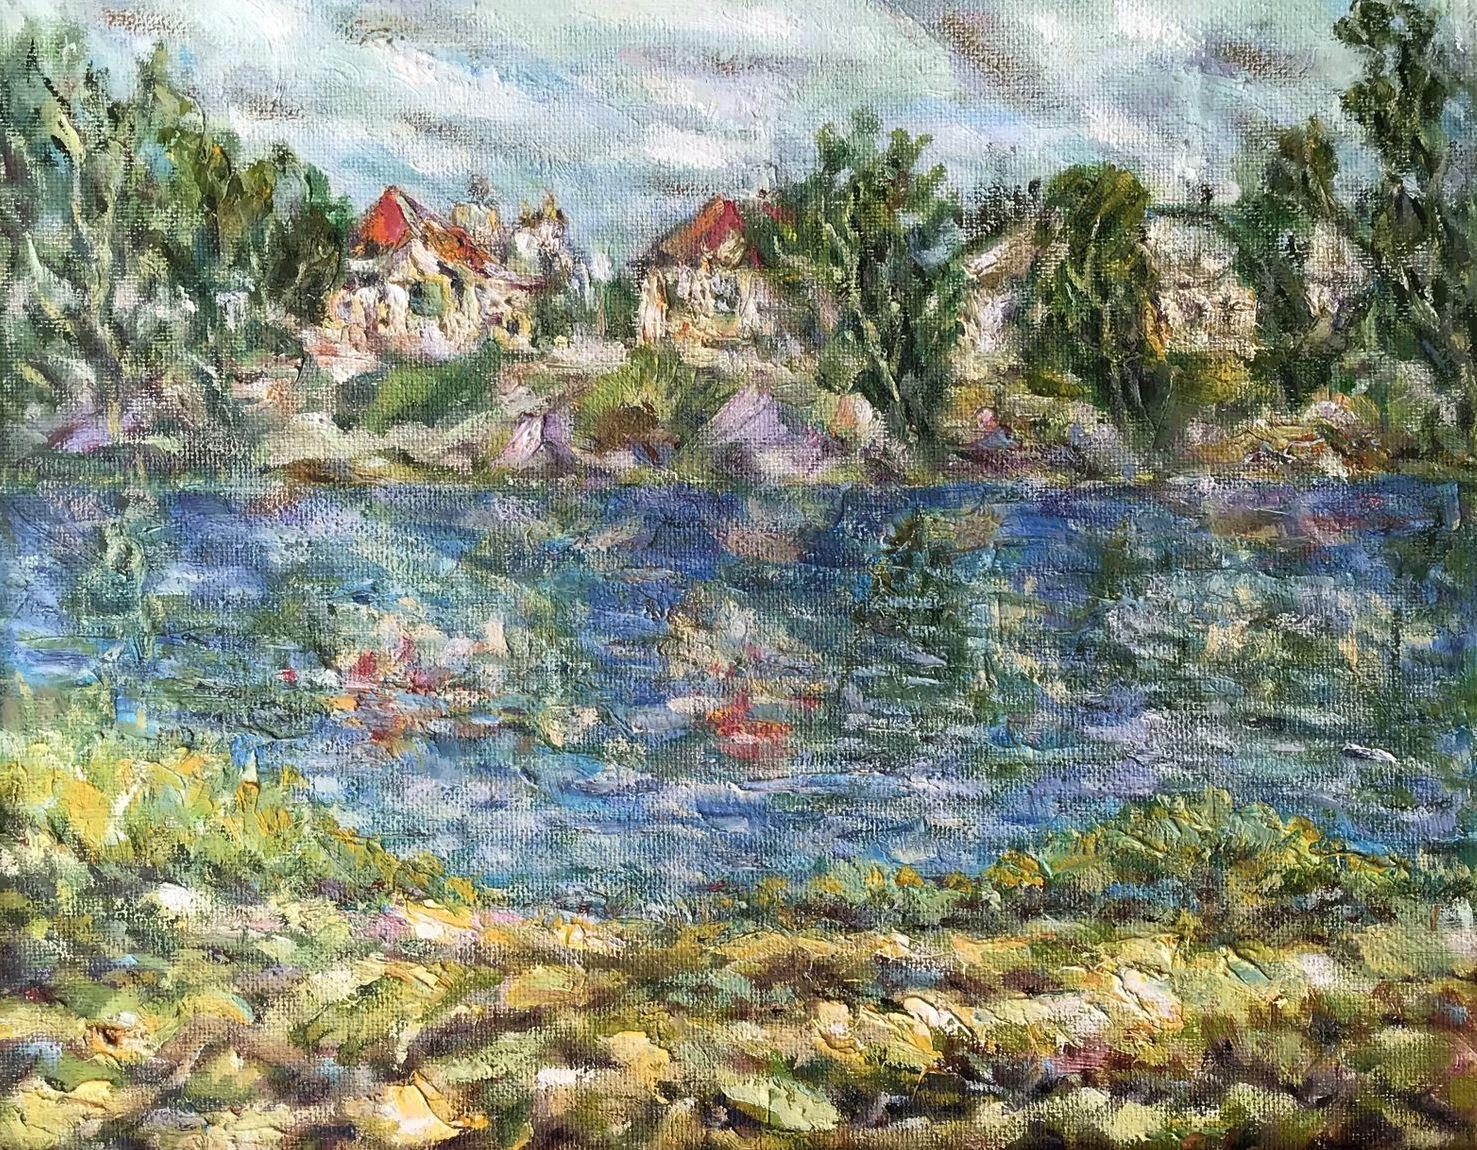 Near the River Psel, Landscape, Original oil Painting, Handmade, Ready to Hang